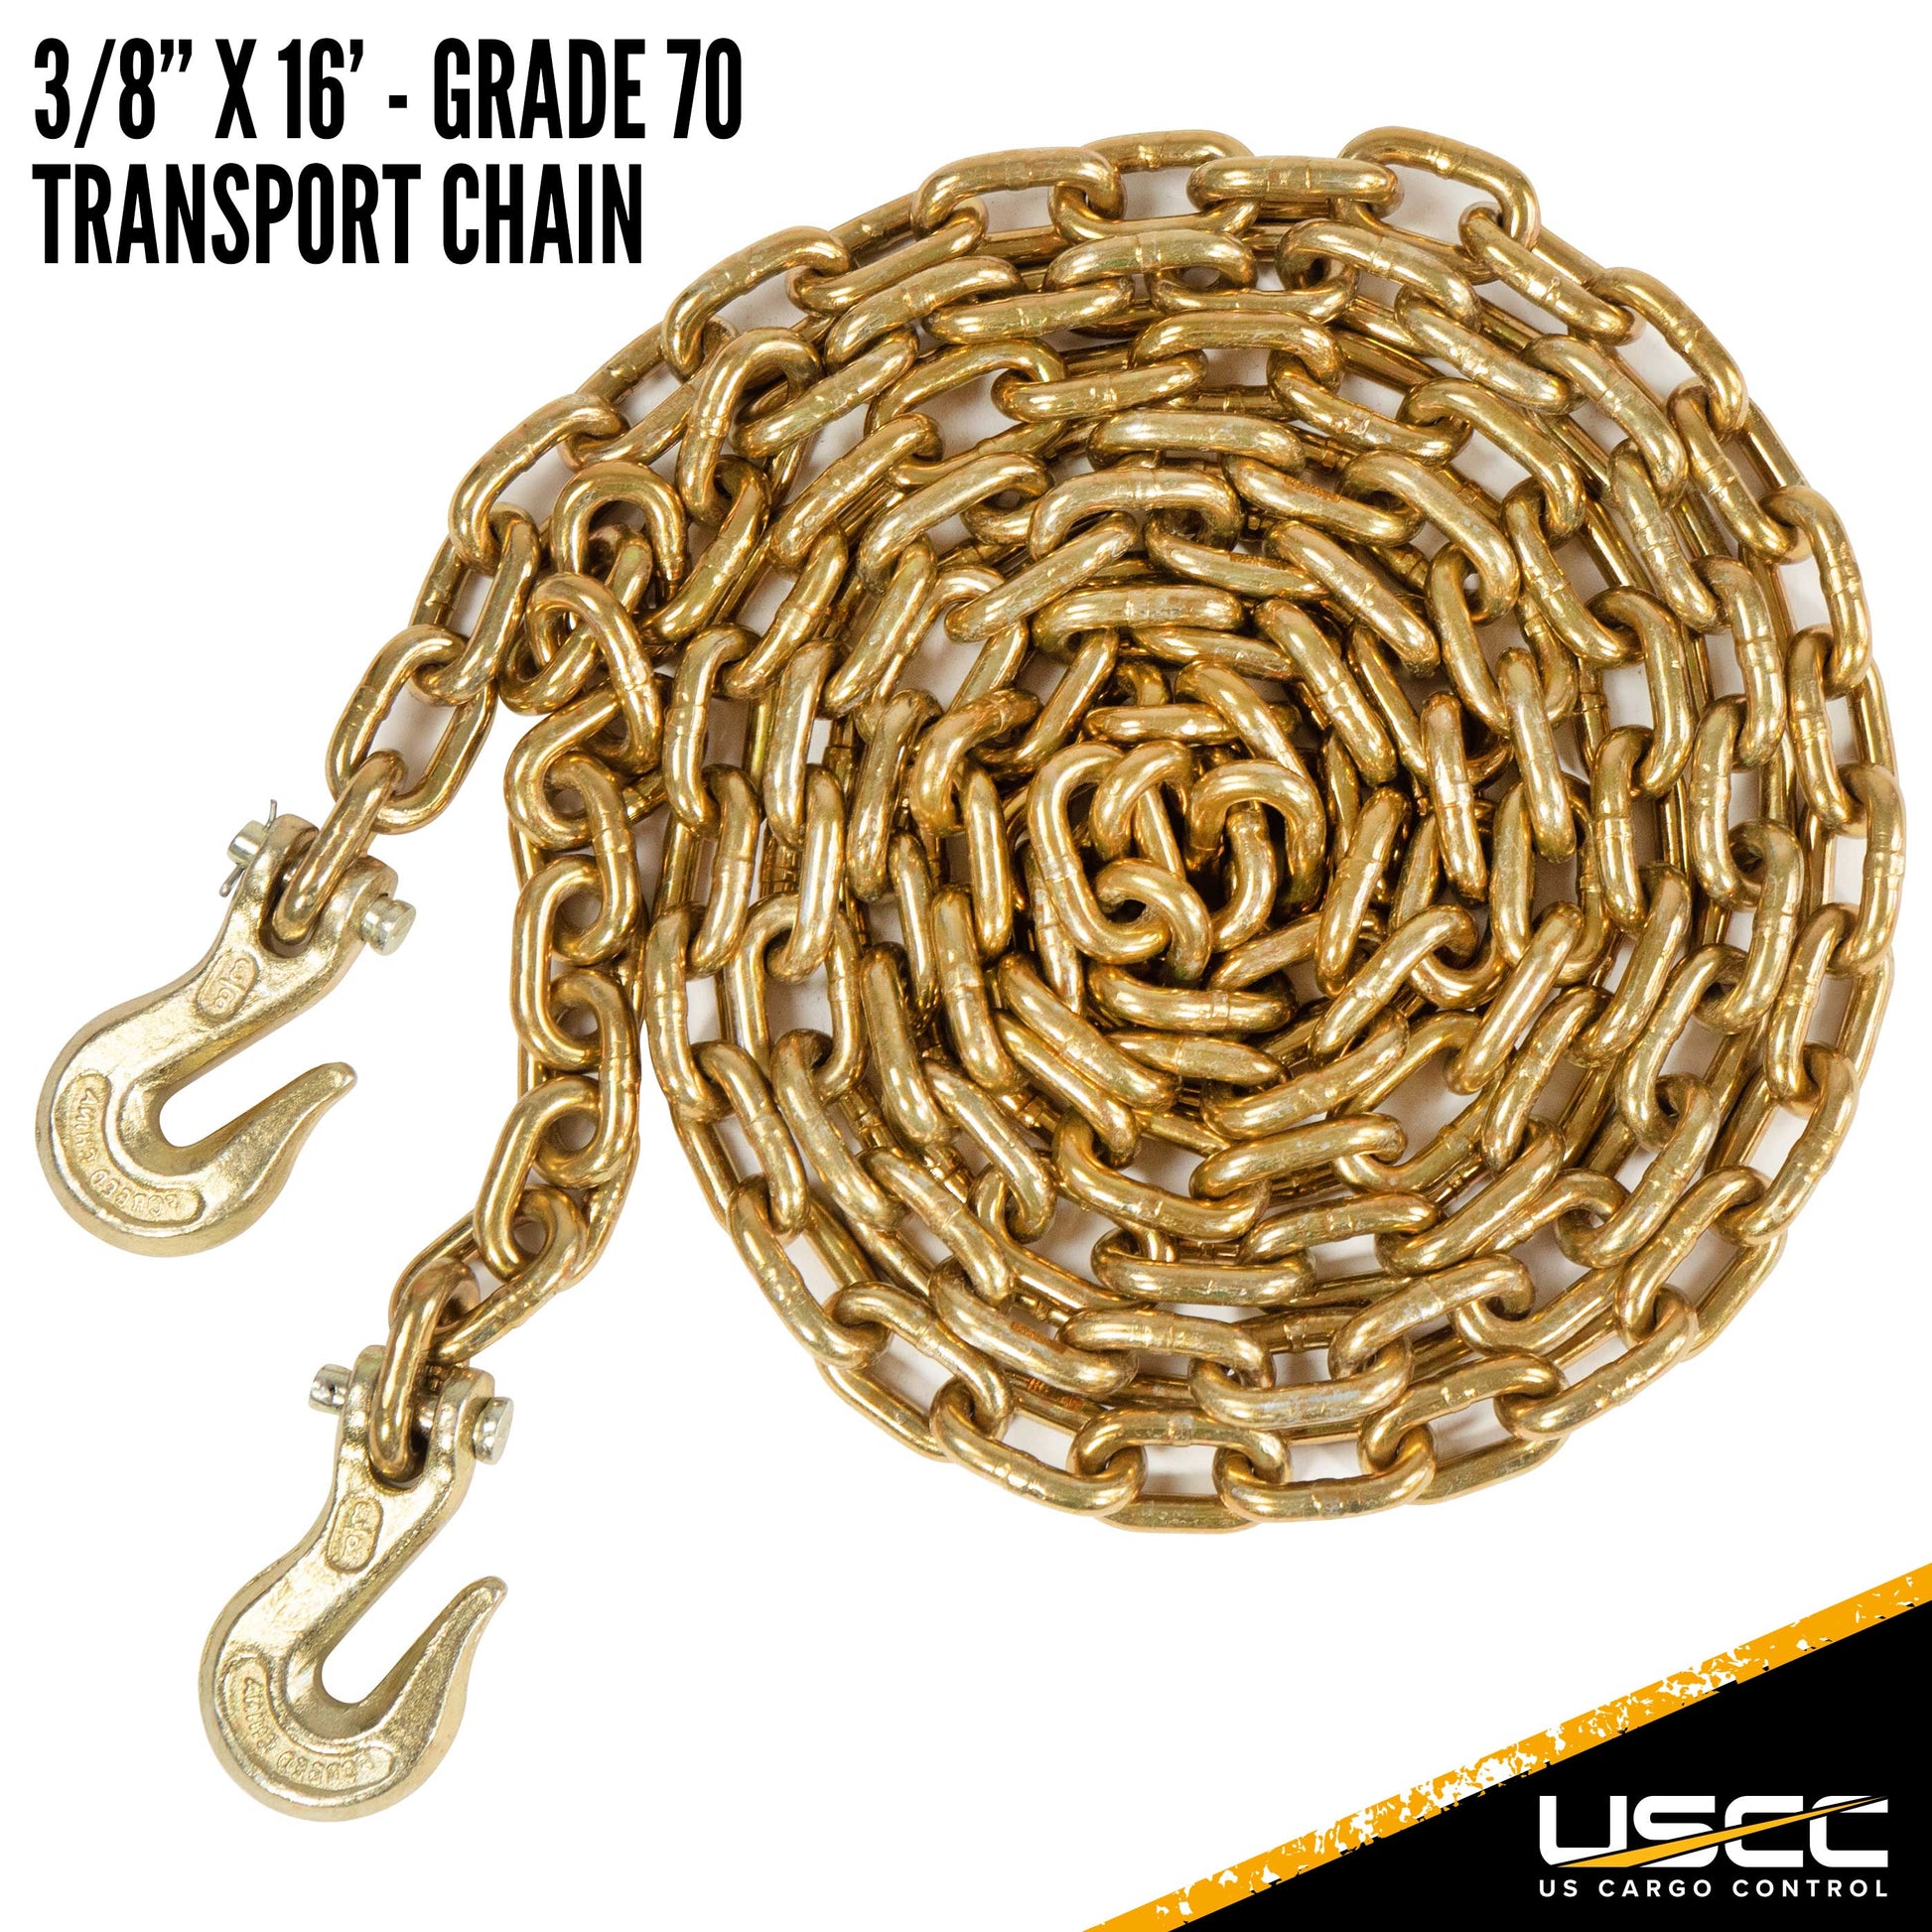 Grade 70 38 inch x 16 foot Peerless Chain and Binder Kit image 3 of 8